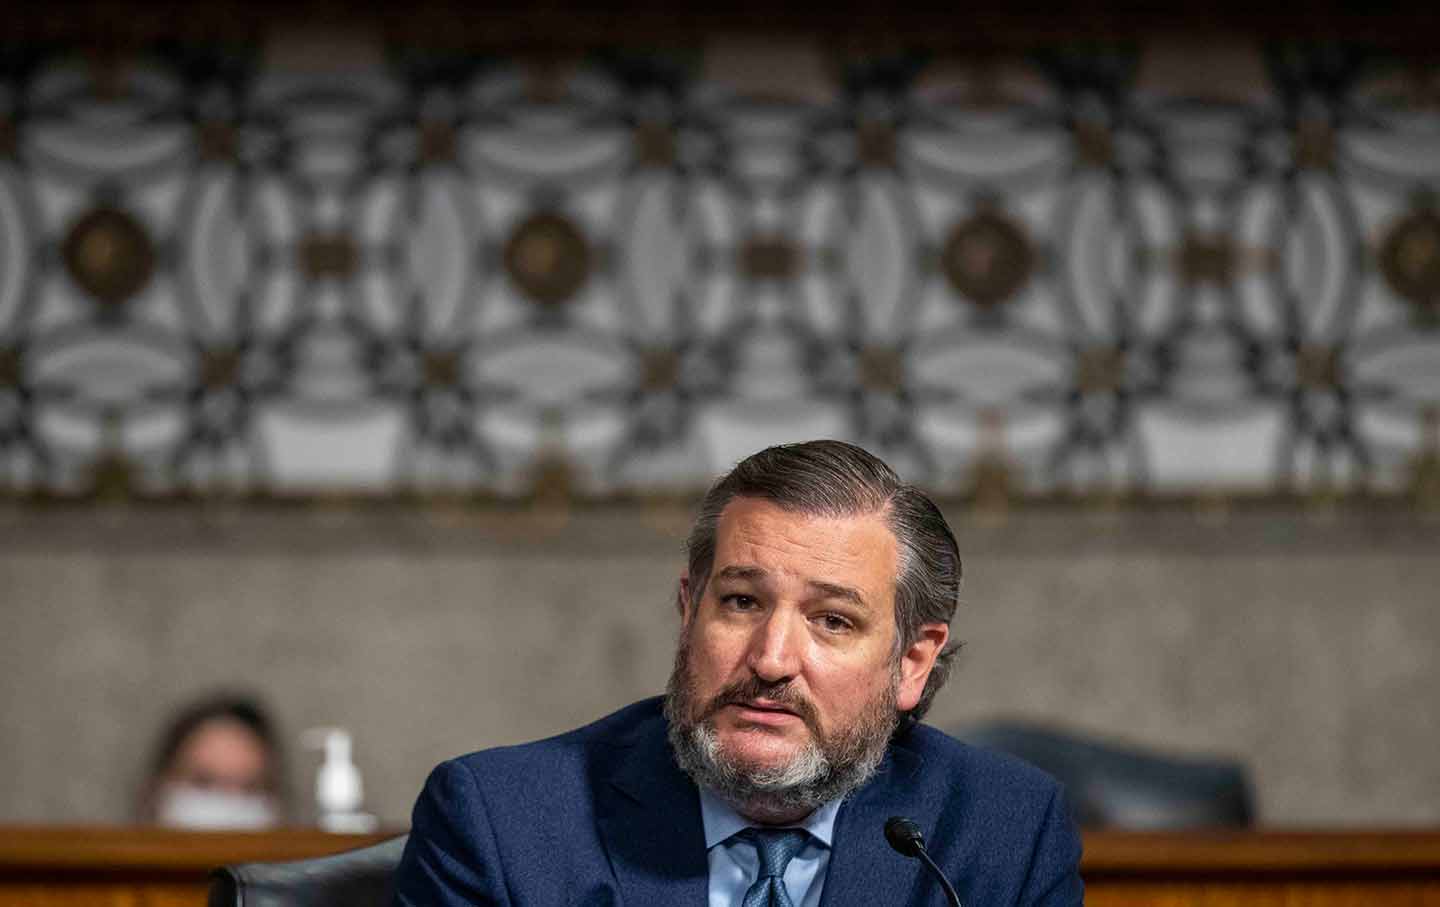 On Voting Rights, Ted Cruz Tells the Truth for Once